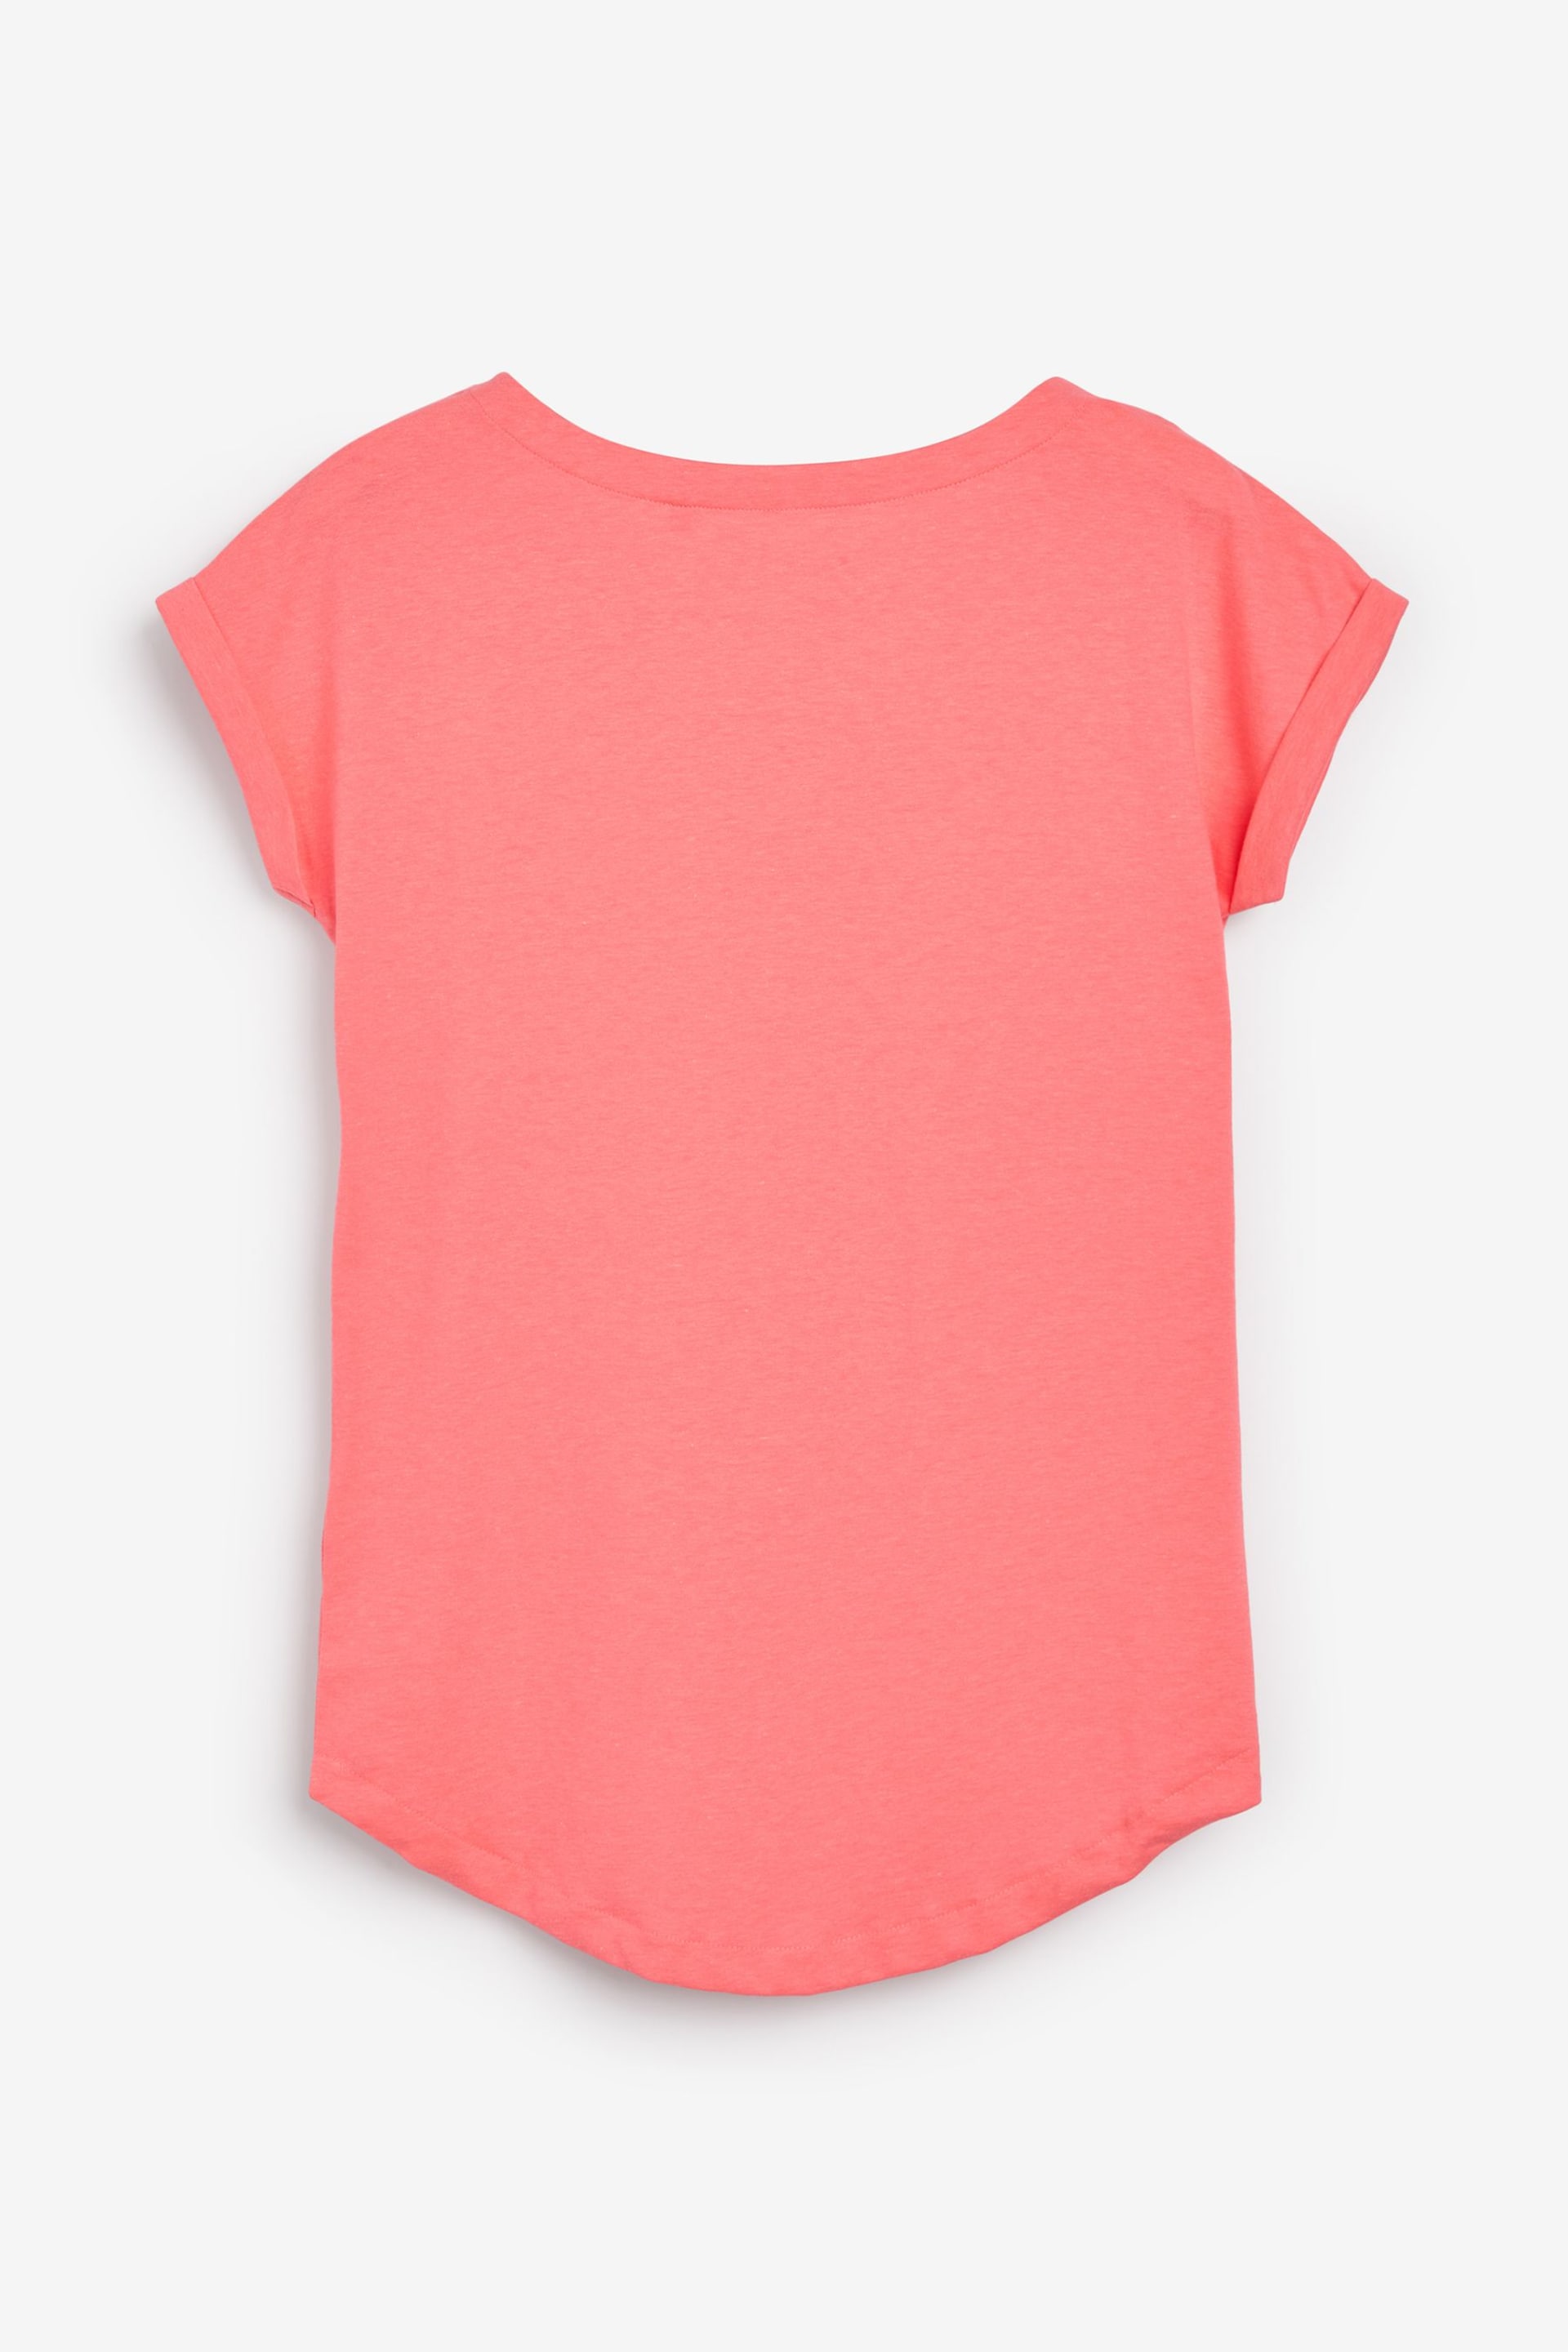 Fluro Coral Pink Round Neck Cap Sleeve T-Shirt - Image 3 of 4